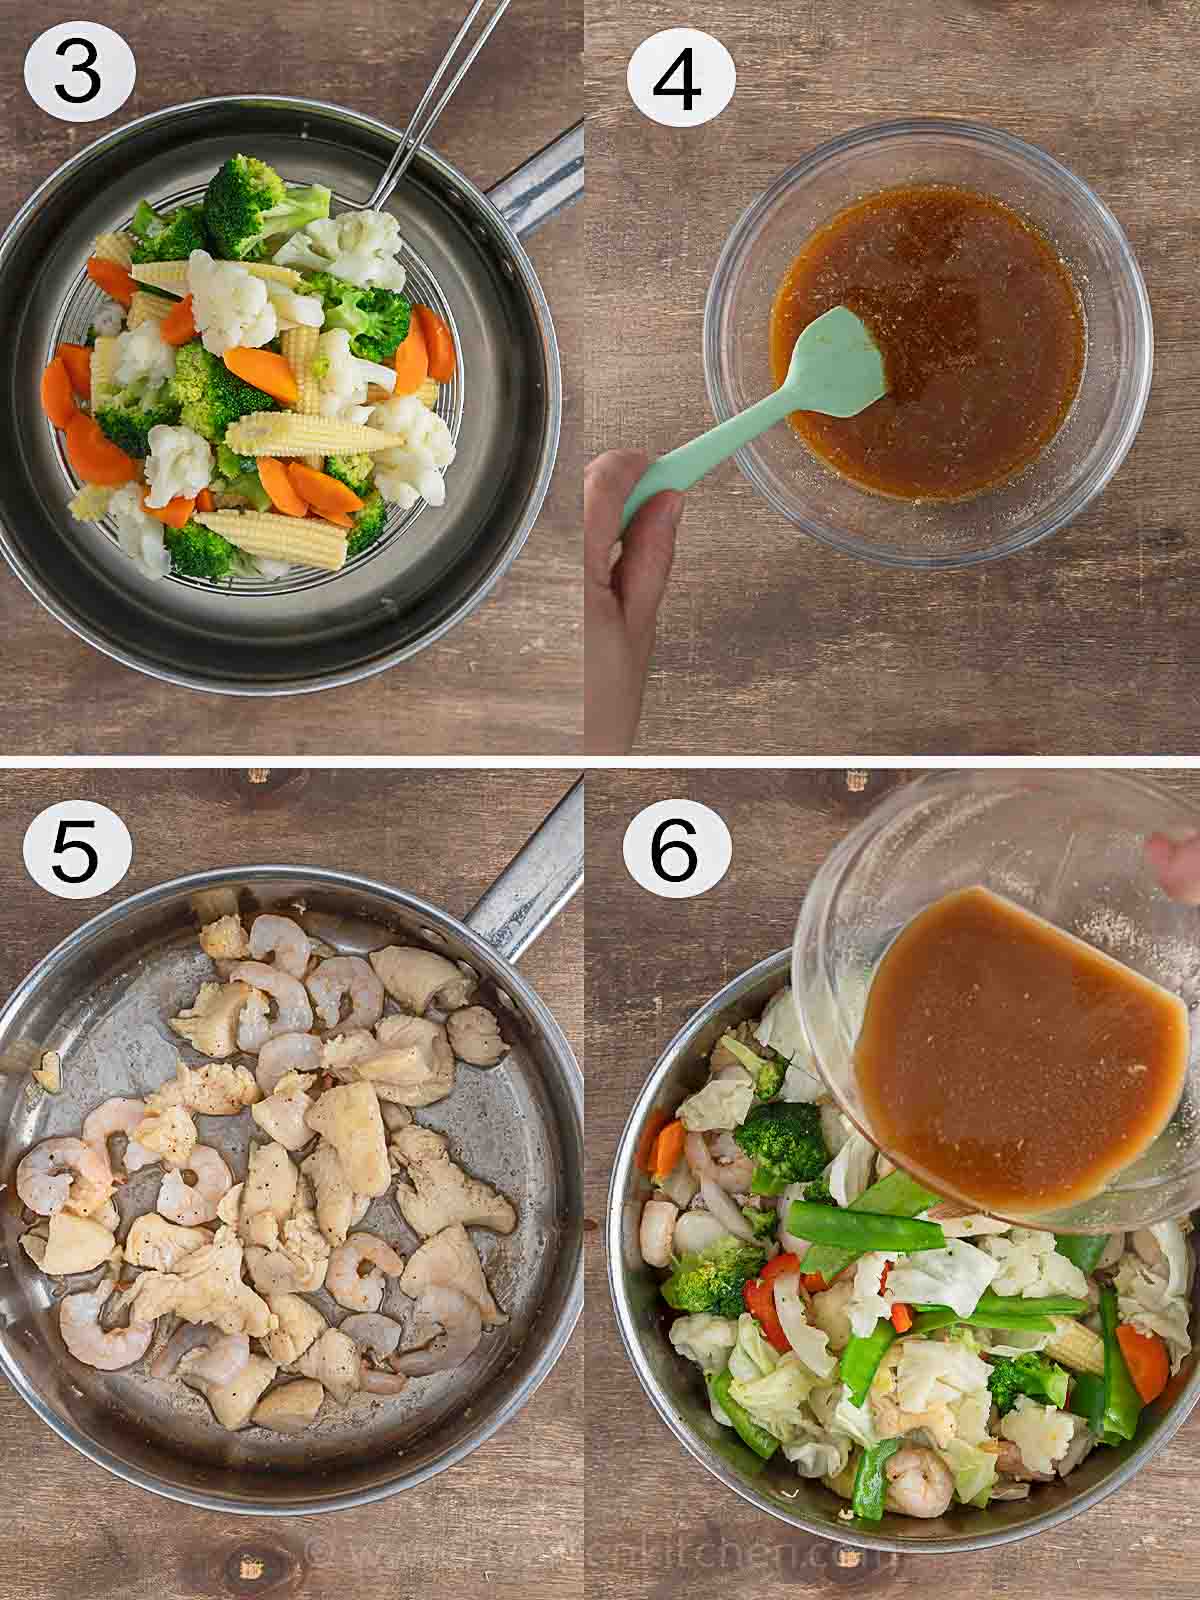 step-by-step process on how to cook Filipino vegetable stir-fry called Chop suey.